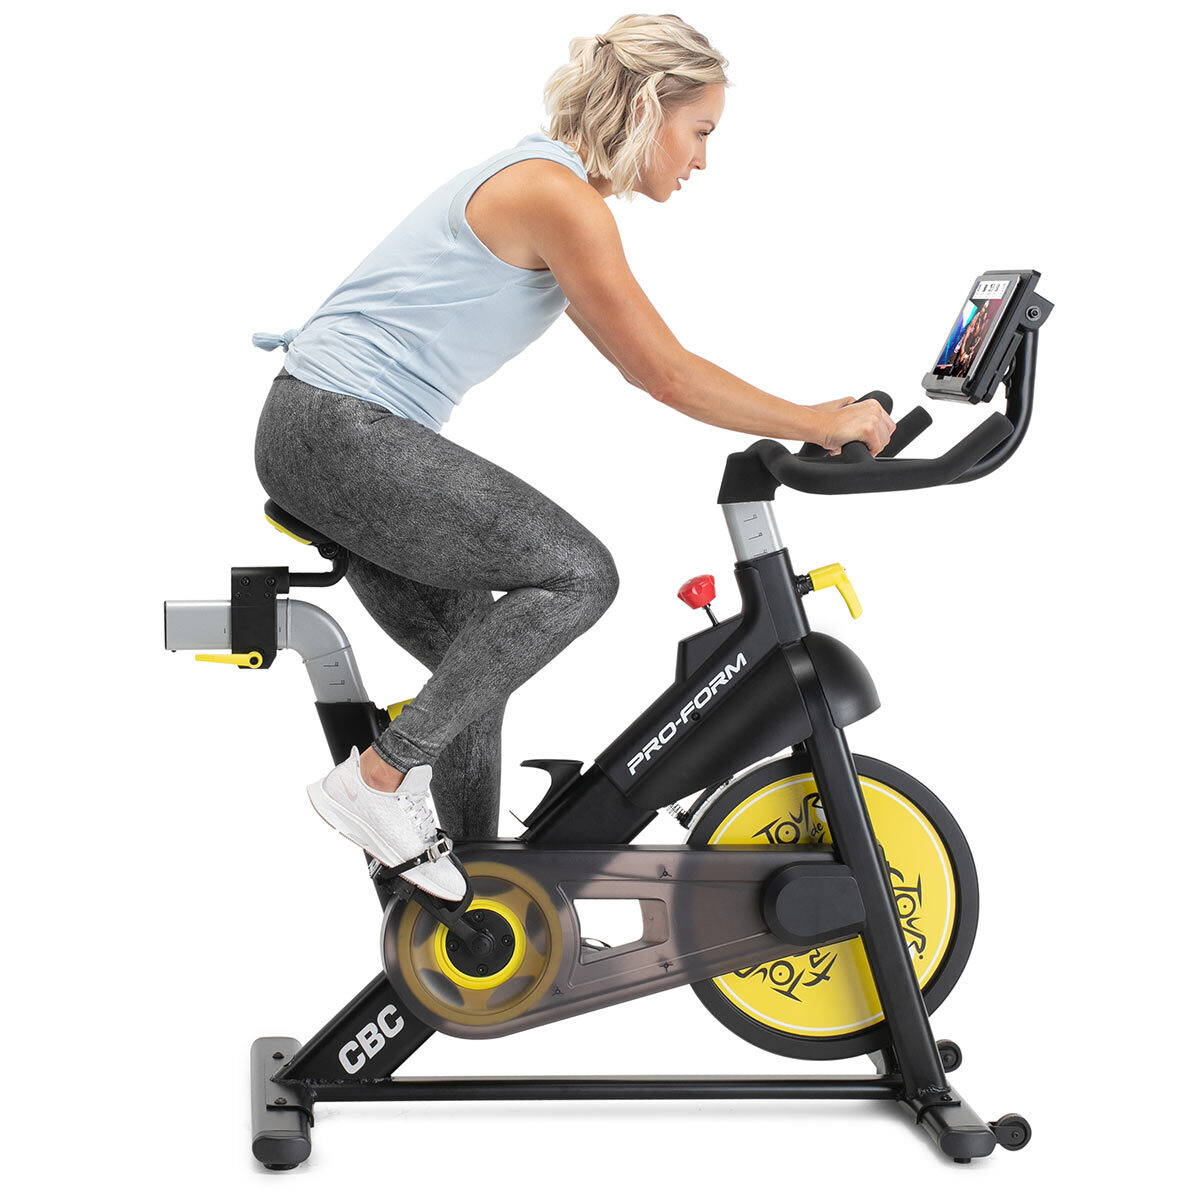 toy spin bike